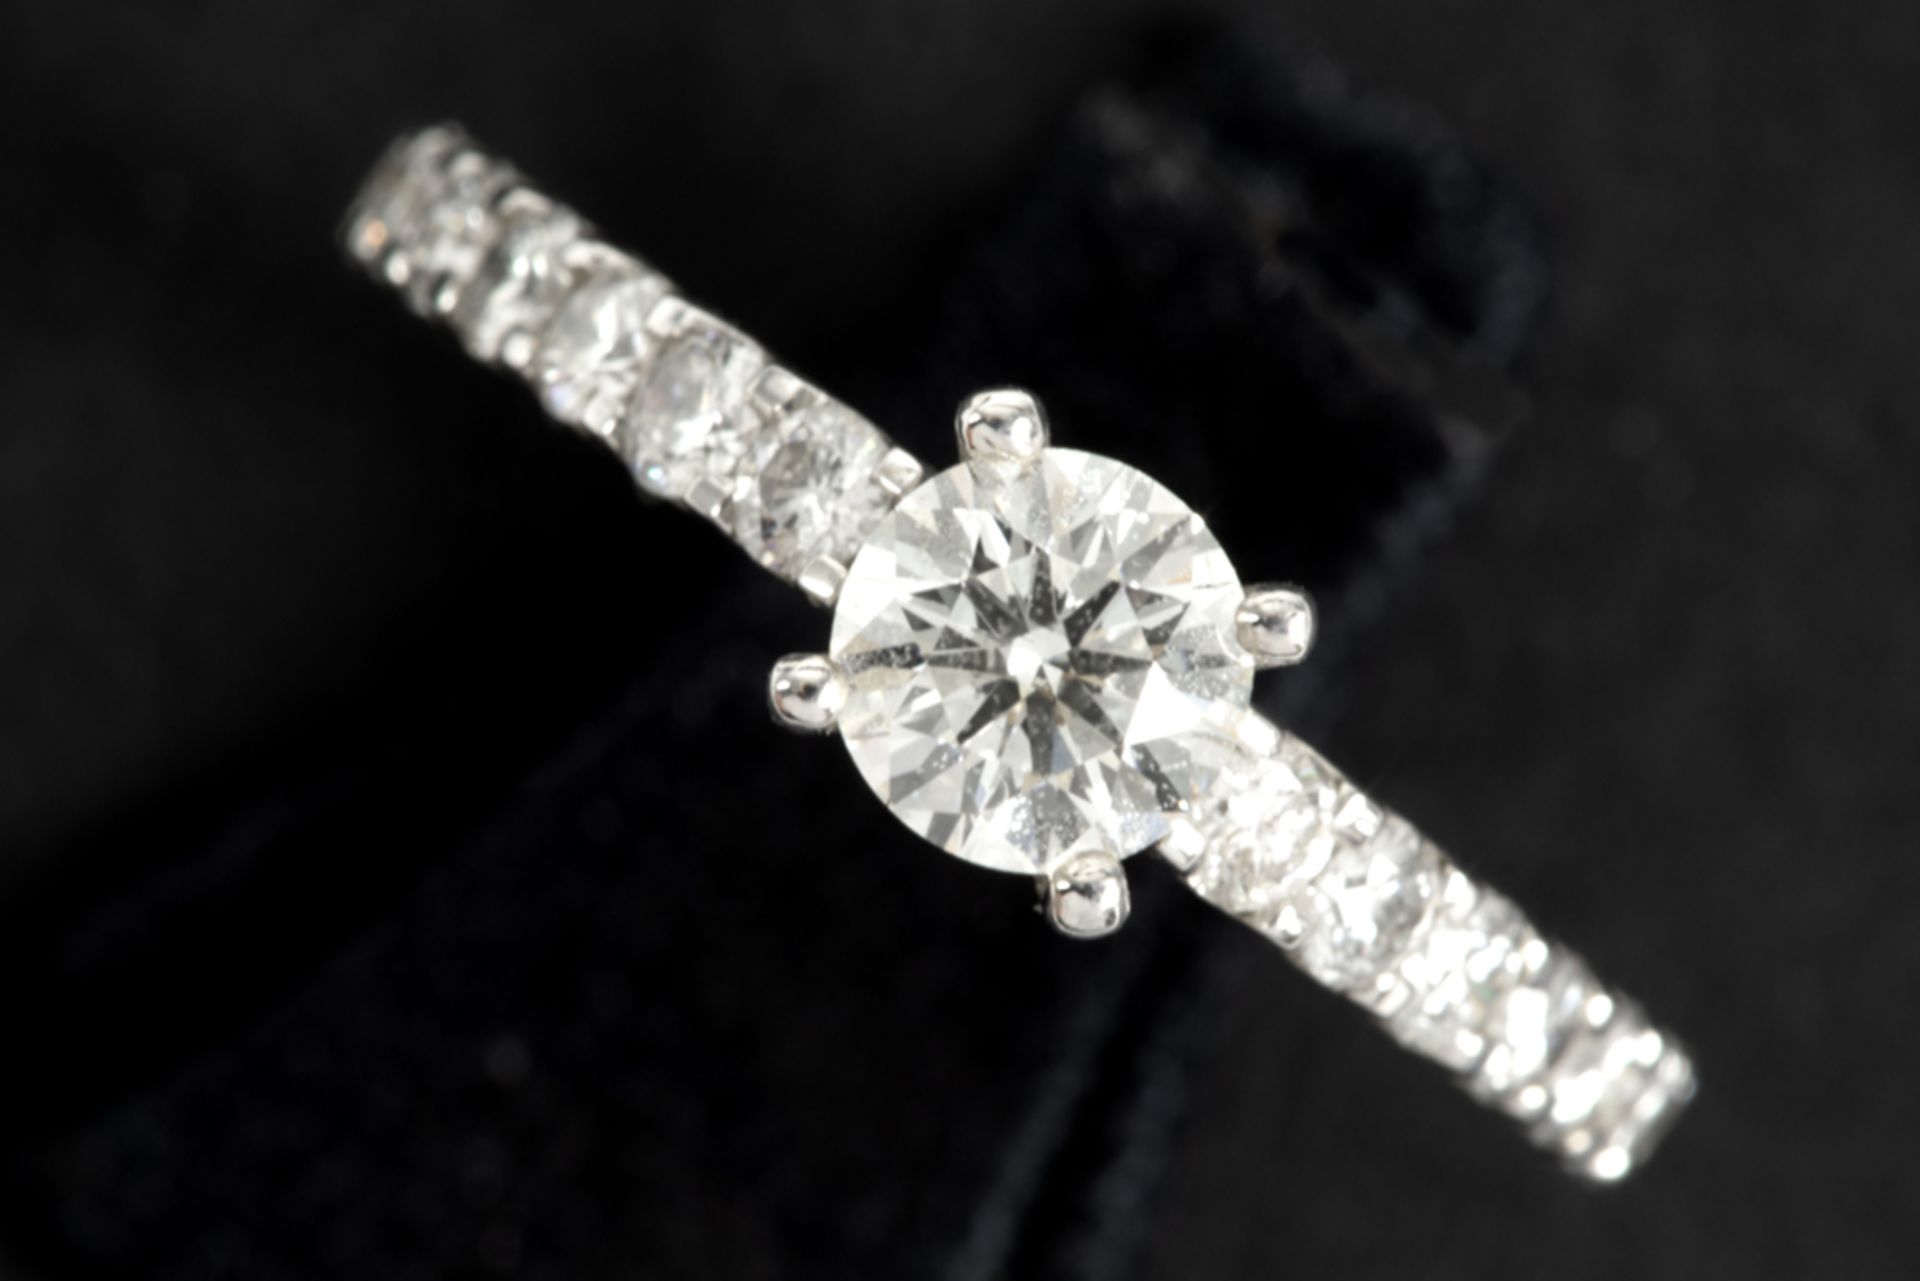 a 0,60 carat quality brilliant cut diamond set in a ring in white gold (18 carat) with ca 1 carat of